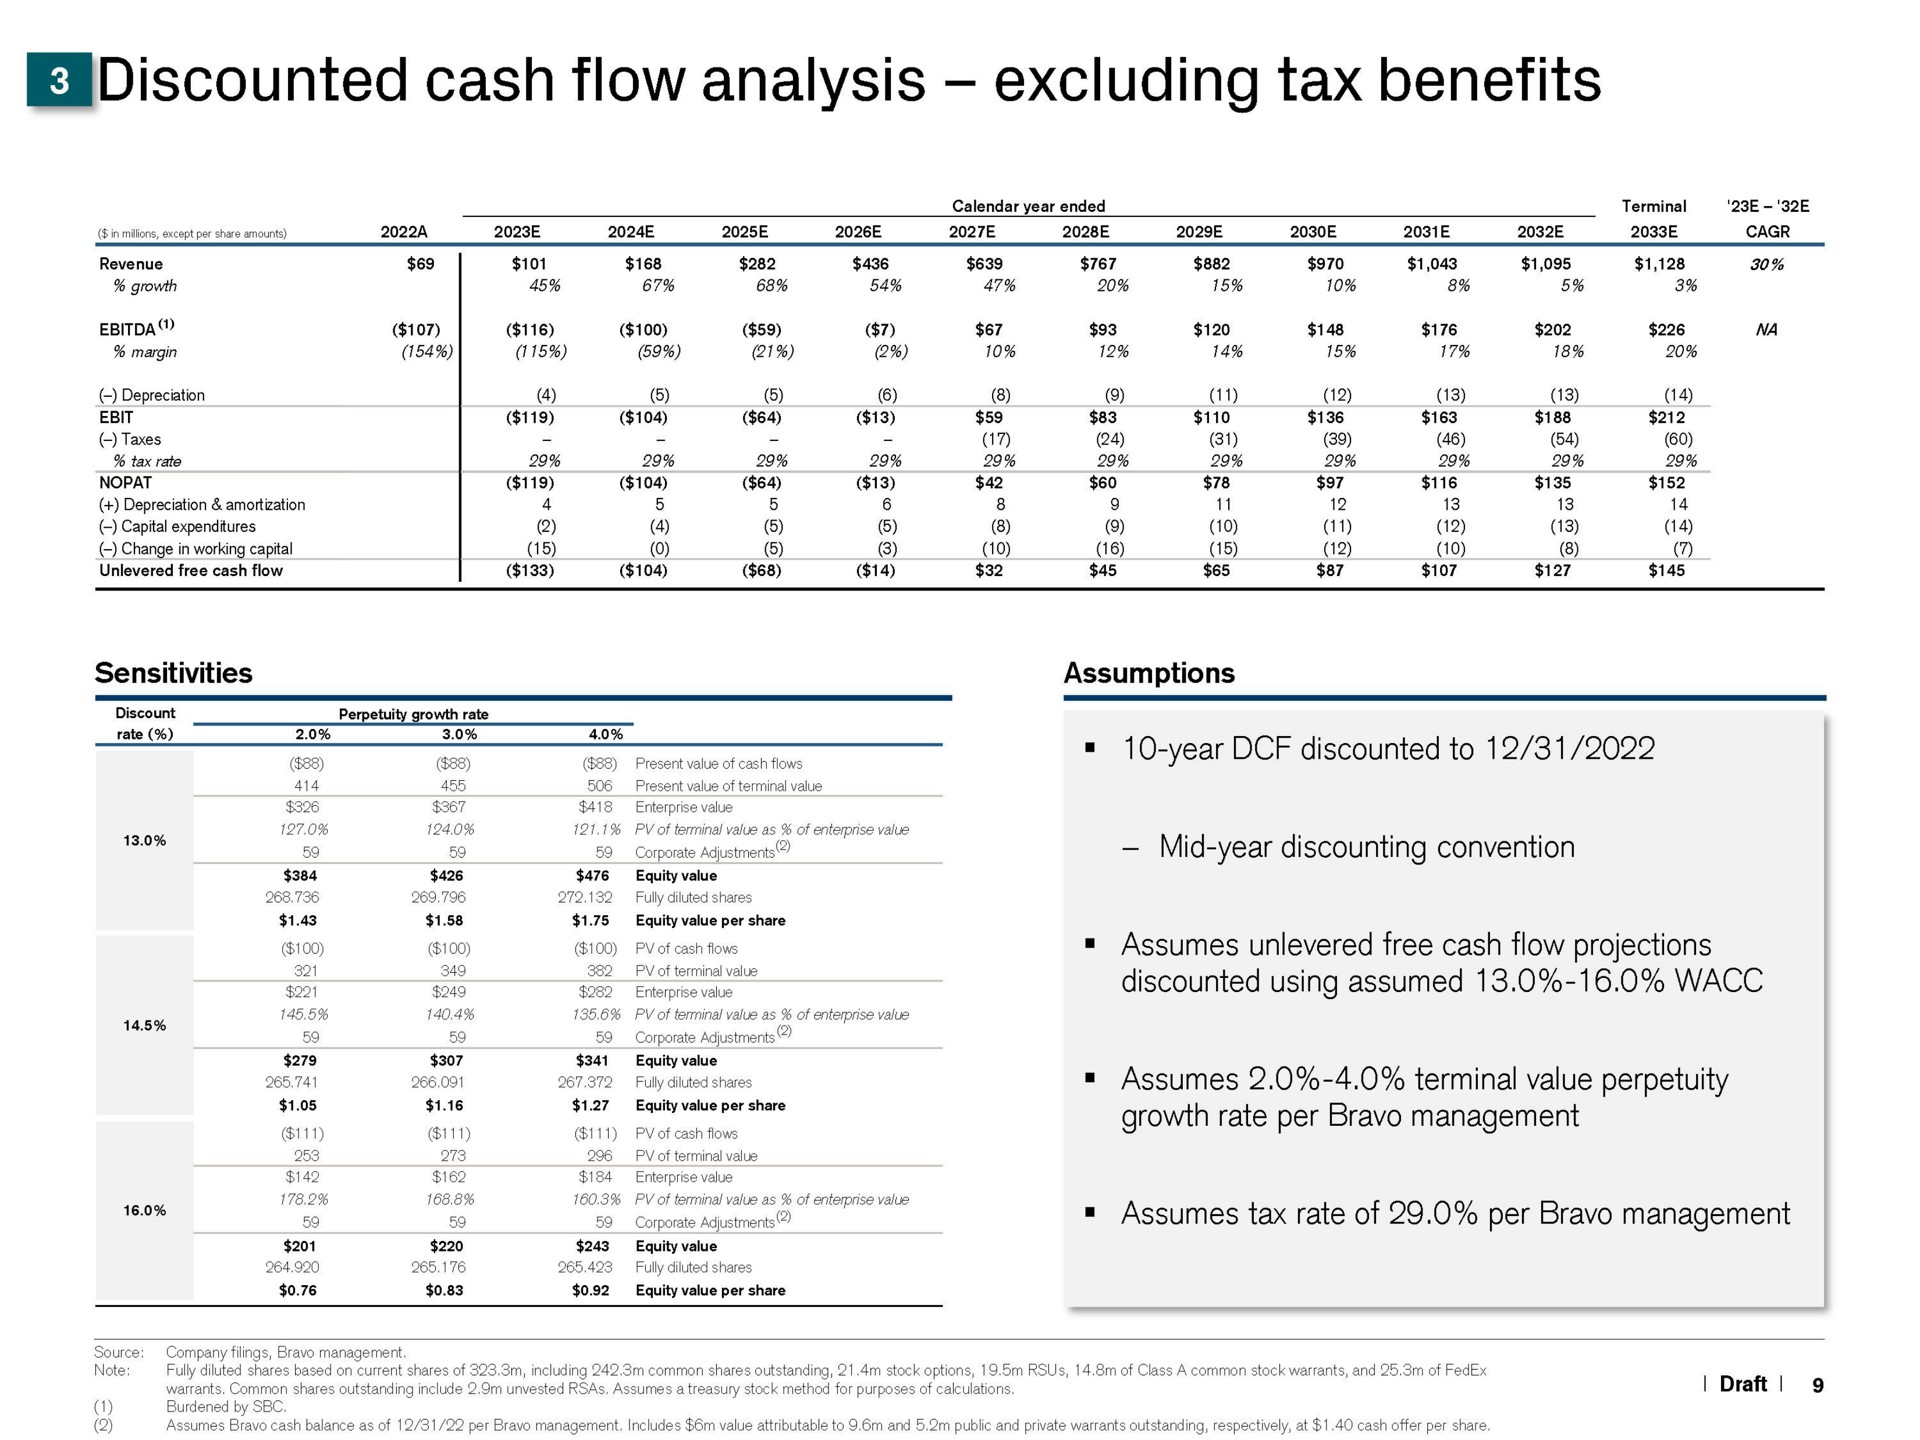 discounted cash flow analysis excluding tax benefits a a a cash flows assumes free cash flow projections discounted using assumed growth rate per bravo management assumes tax rate of per bravo management | Credit Suisse